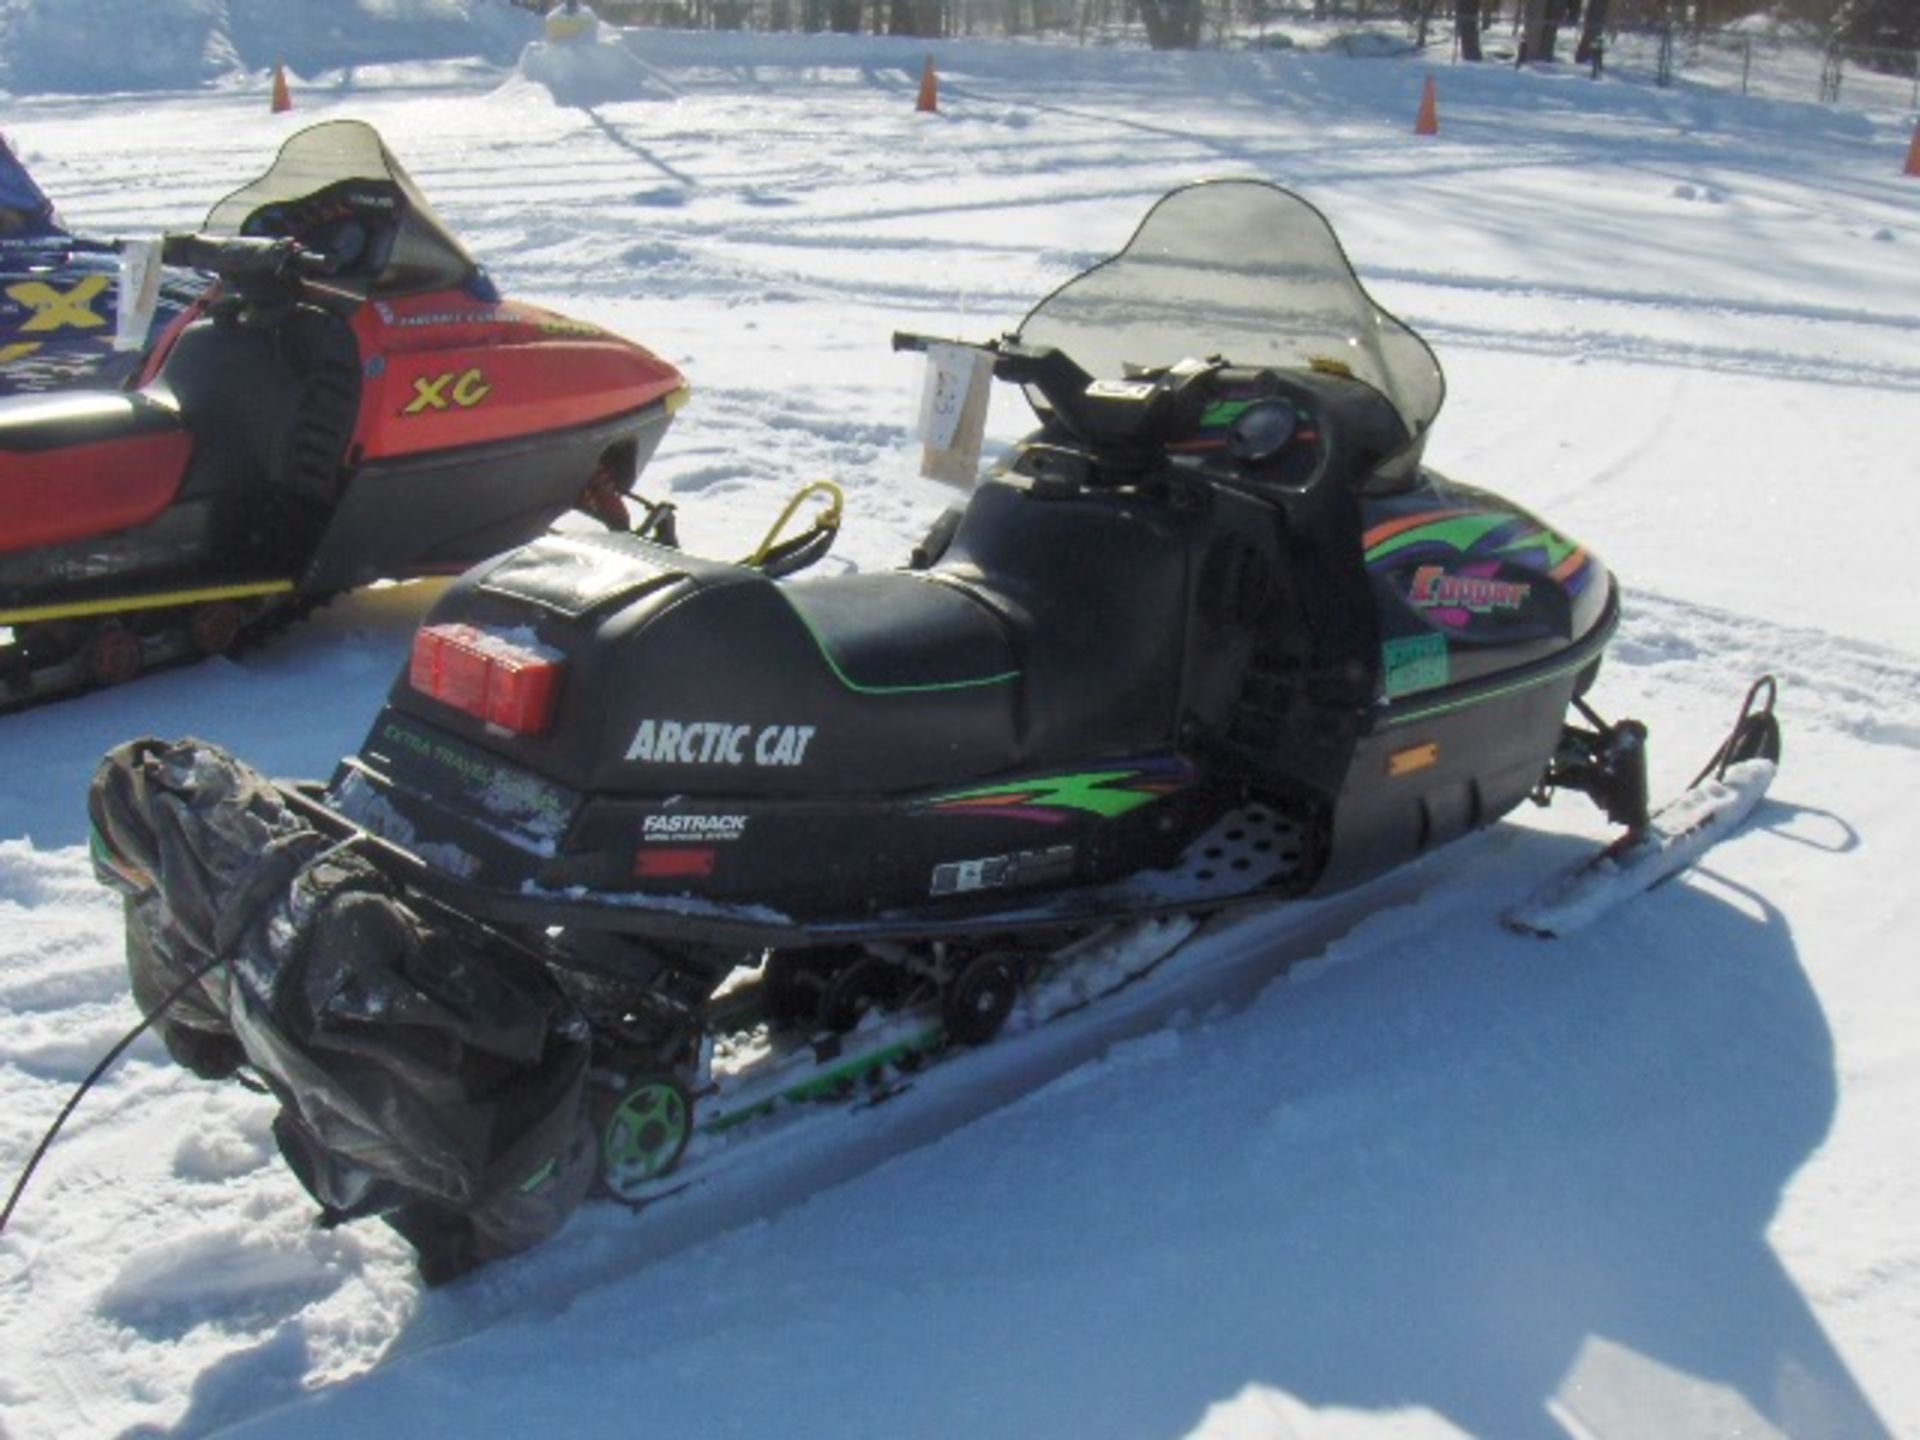 1997 ARCTIC CAT 550 COUGAR  9704424 snowmobile, owner started at time of auction check in, cobra - Image 3 of 4